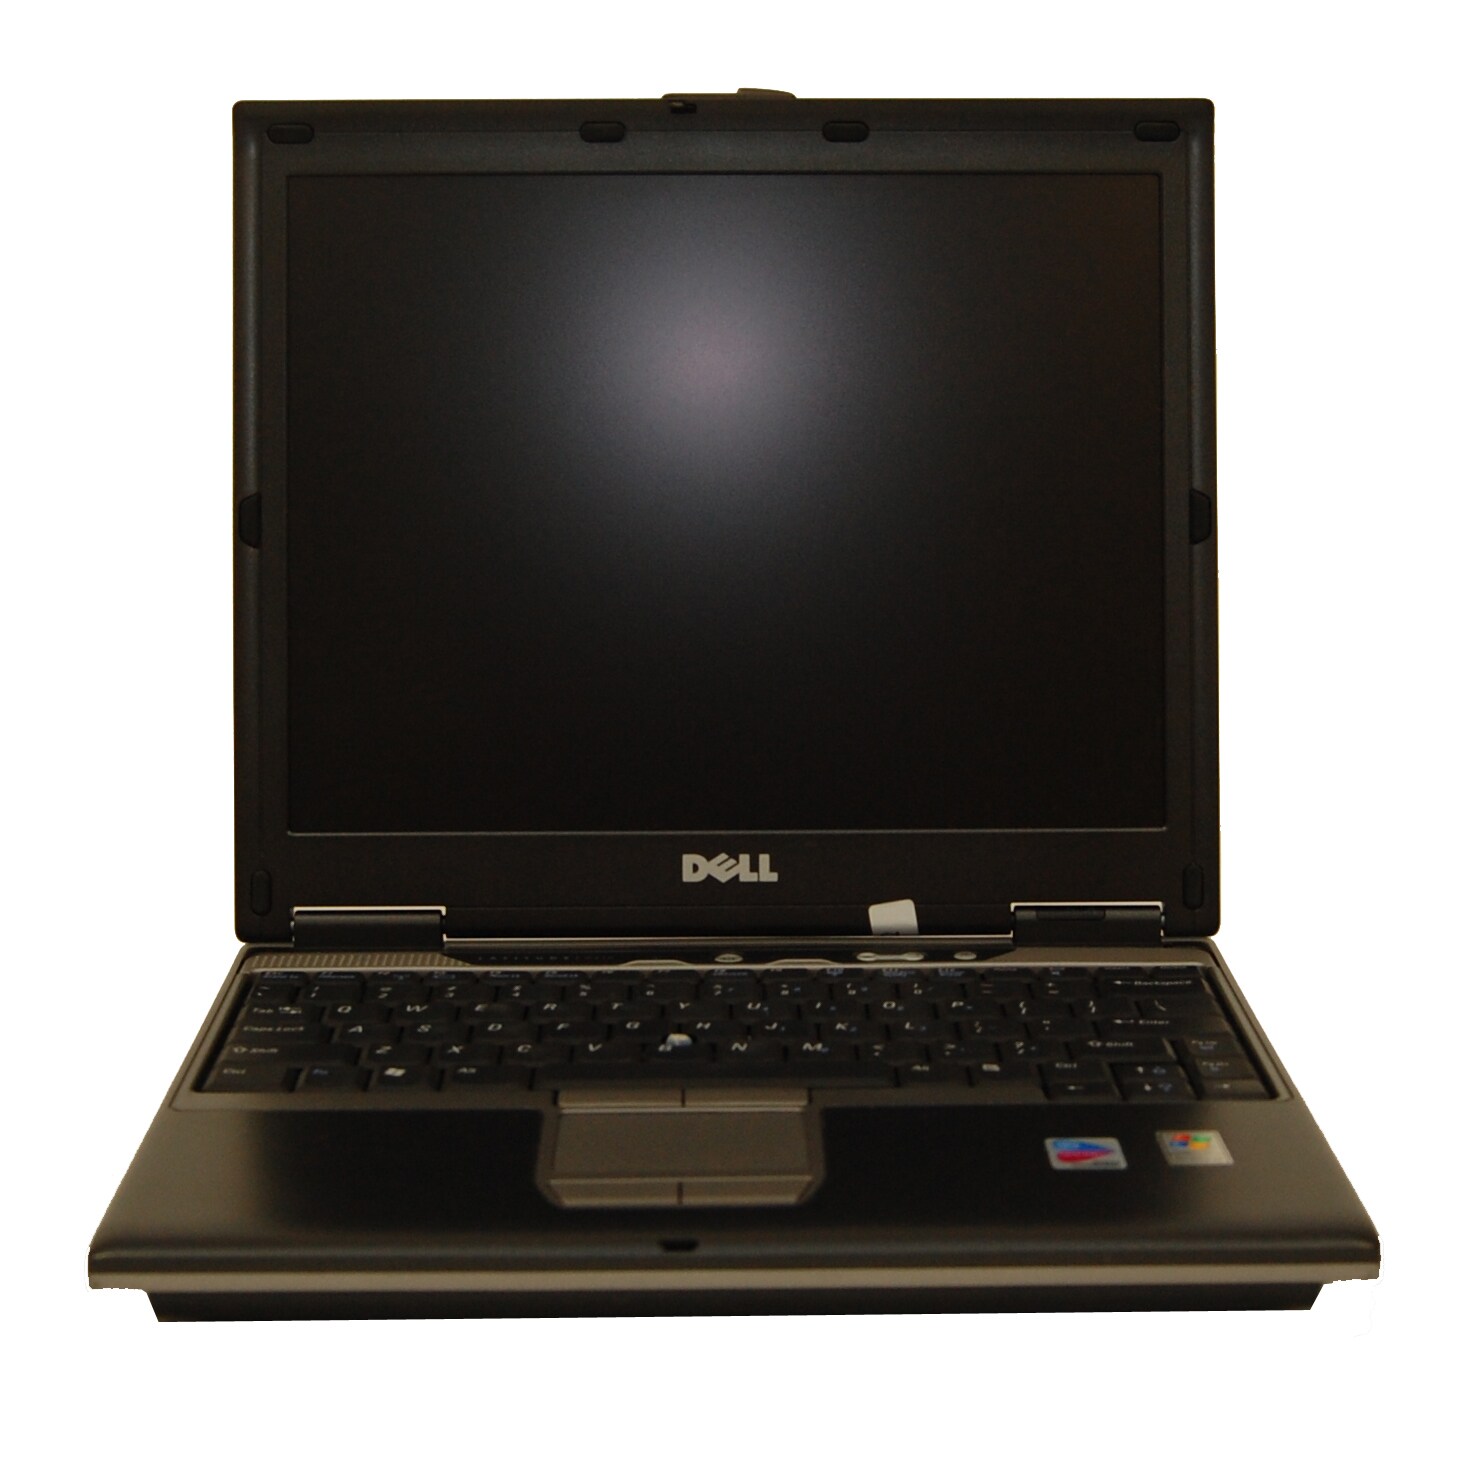 Dell Latitude D410 PM 1.8 GHz 512MB Laptop (Refurbished) - Overstock